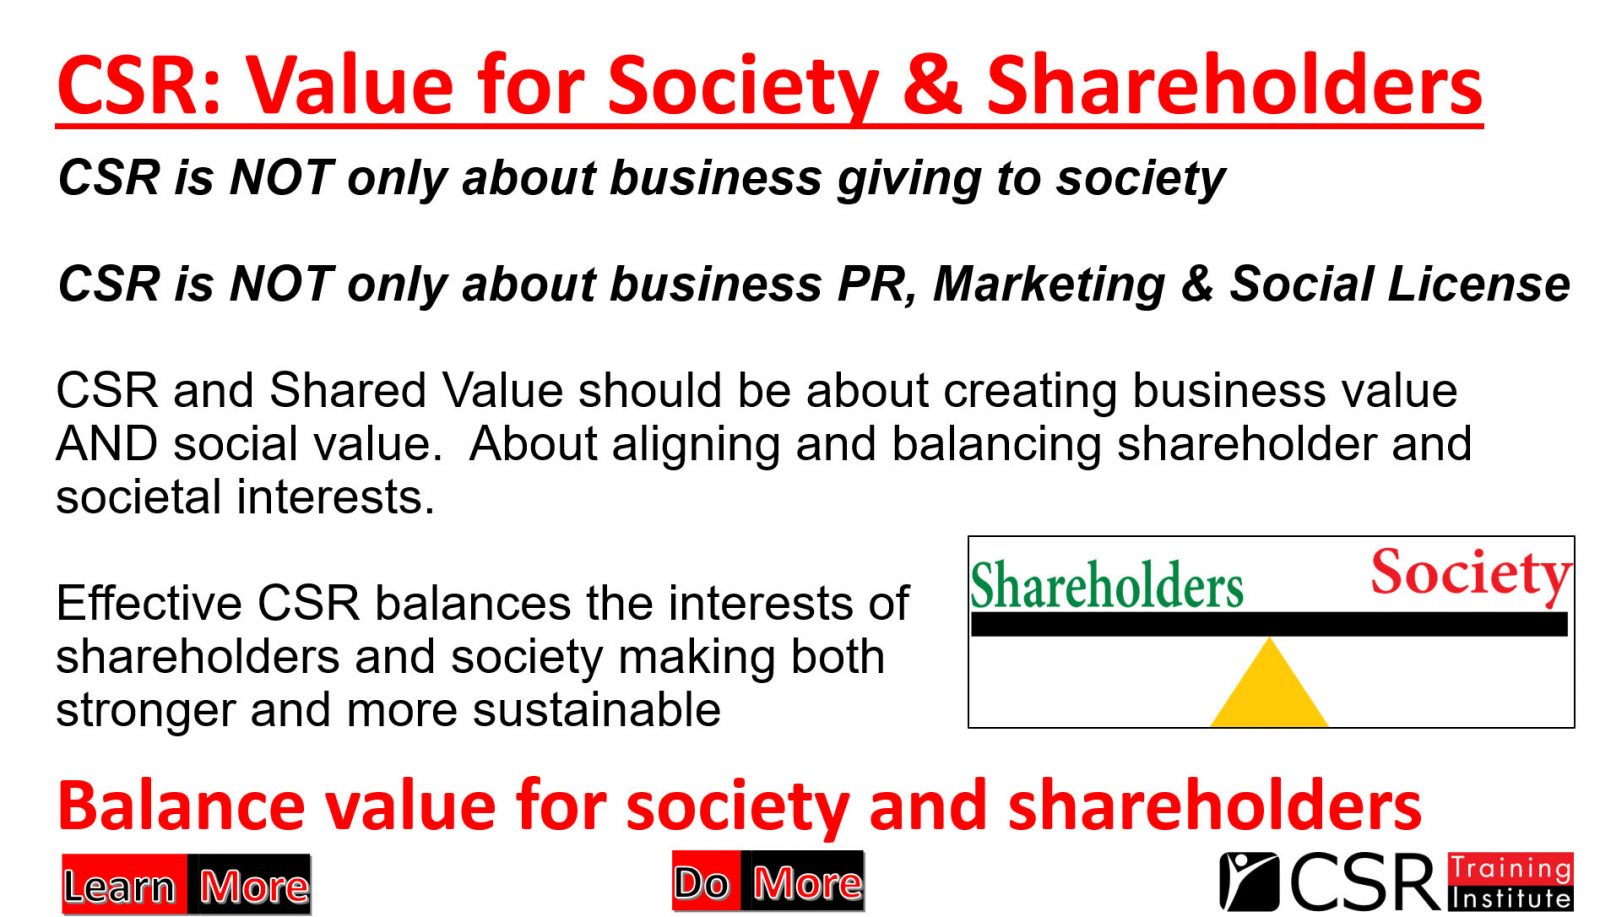 Value for society and shareholders